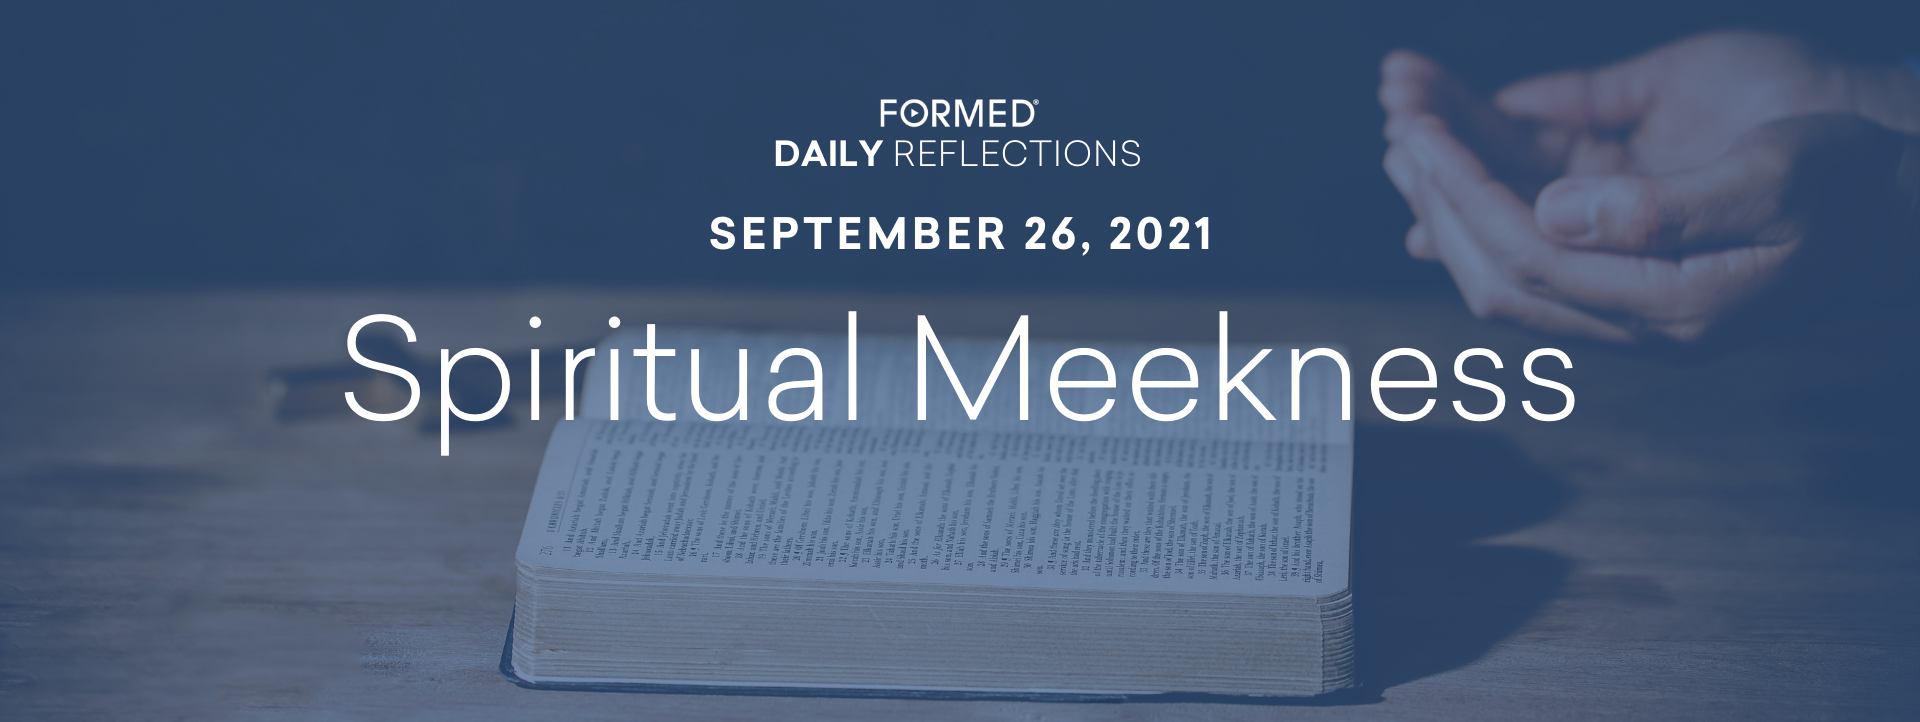 aa daily reflections september 24